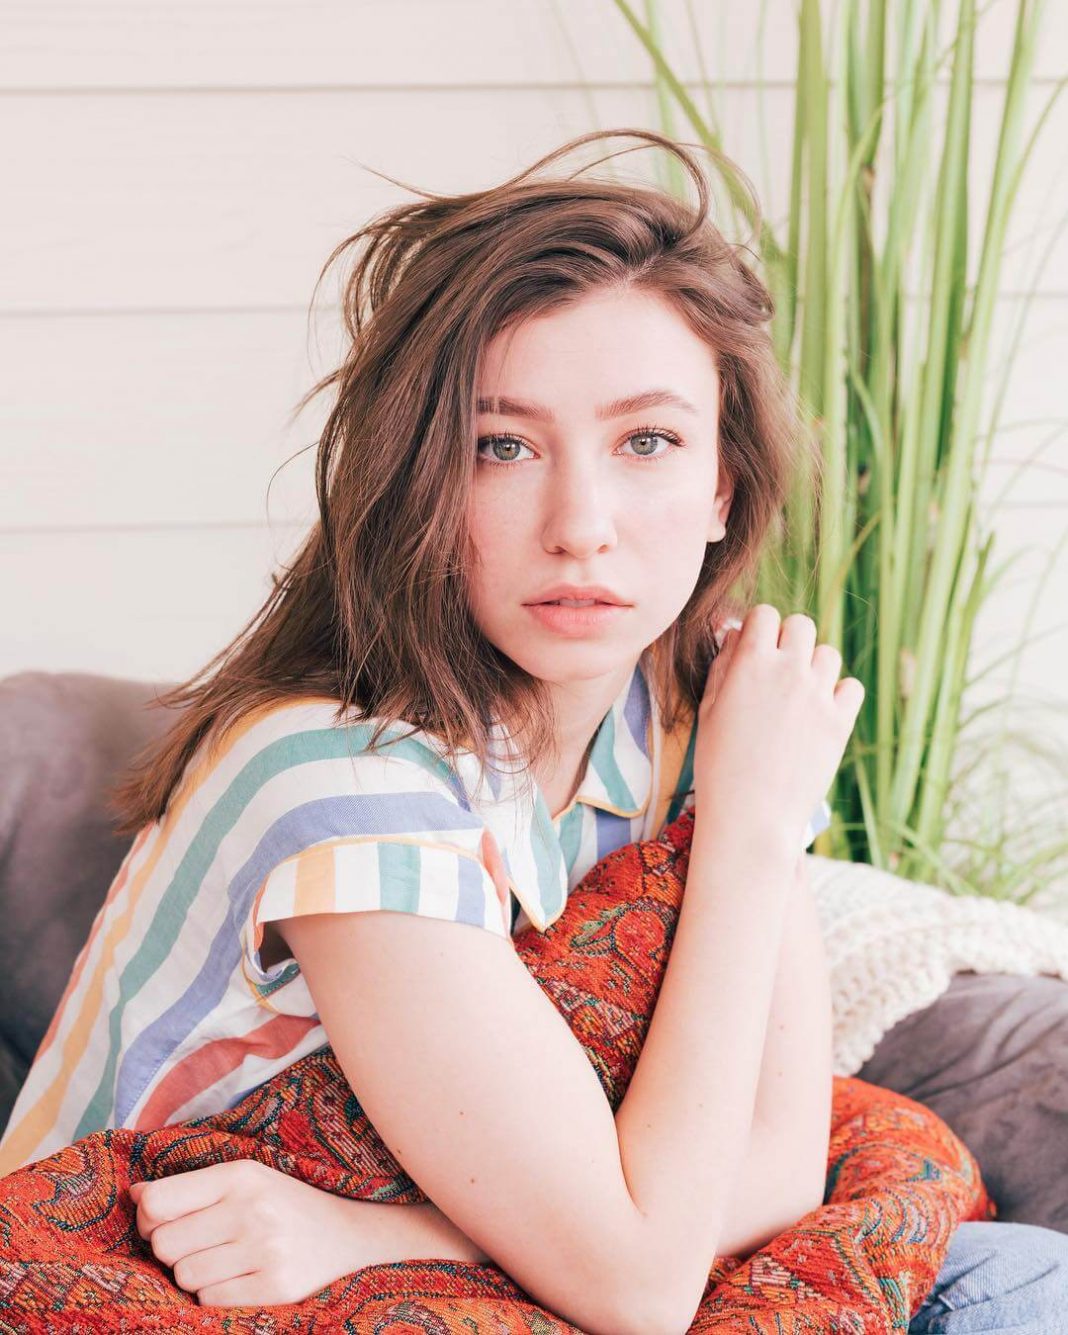 50 Katelyn Nacon Nude Pictures Which Prove Beauty Beyond Recognition 48